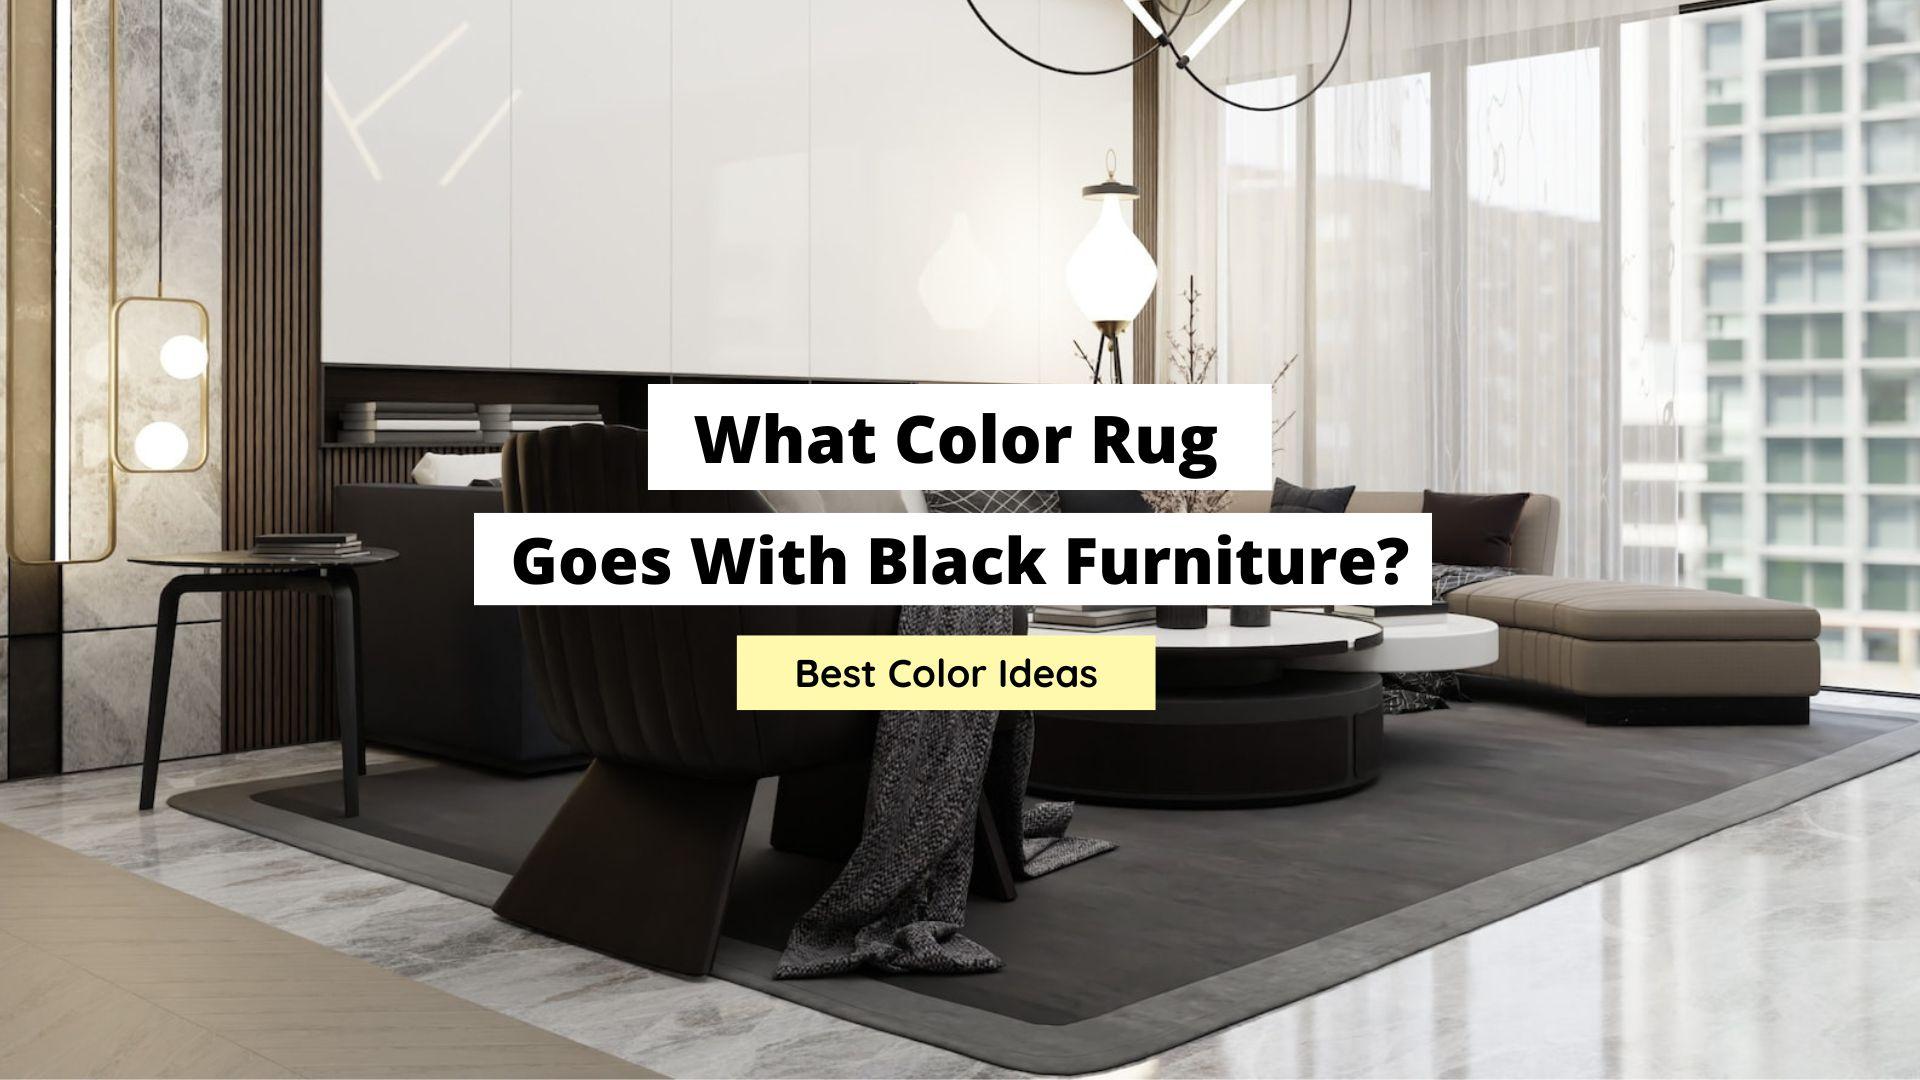 What Color Rug Goes With Black Furniture